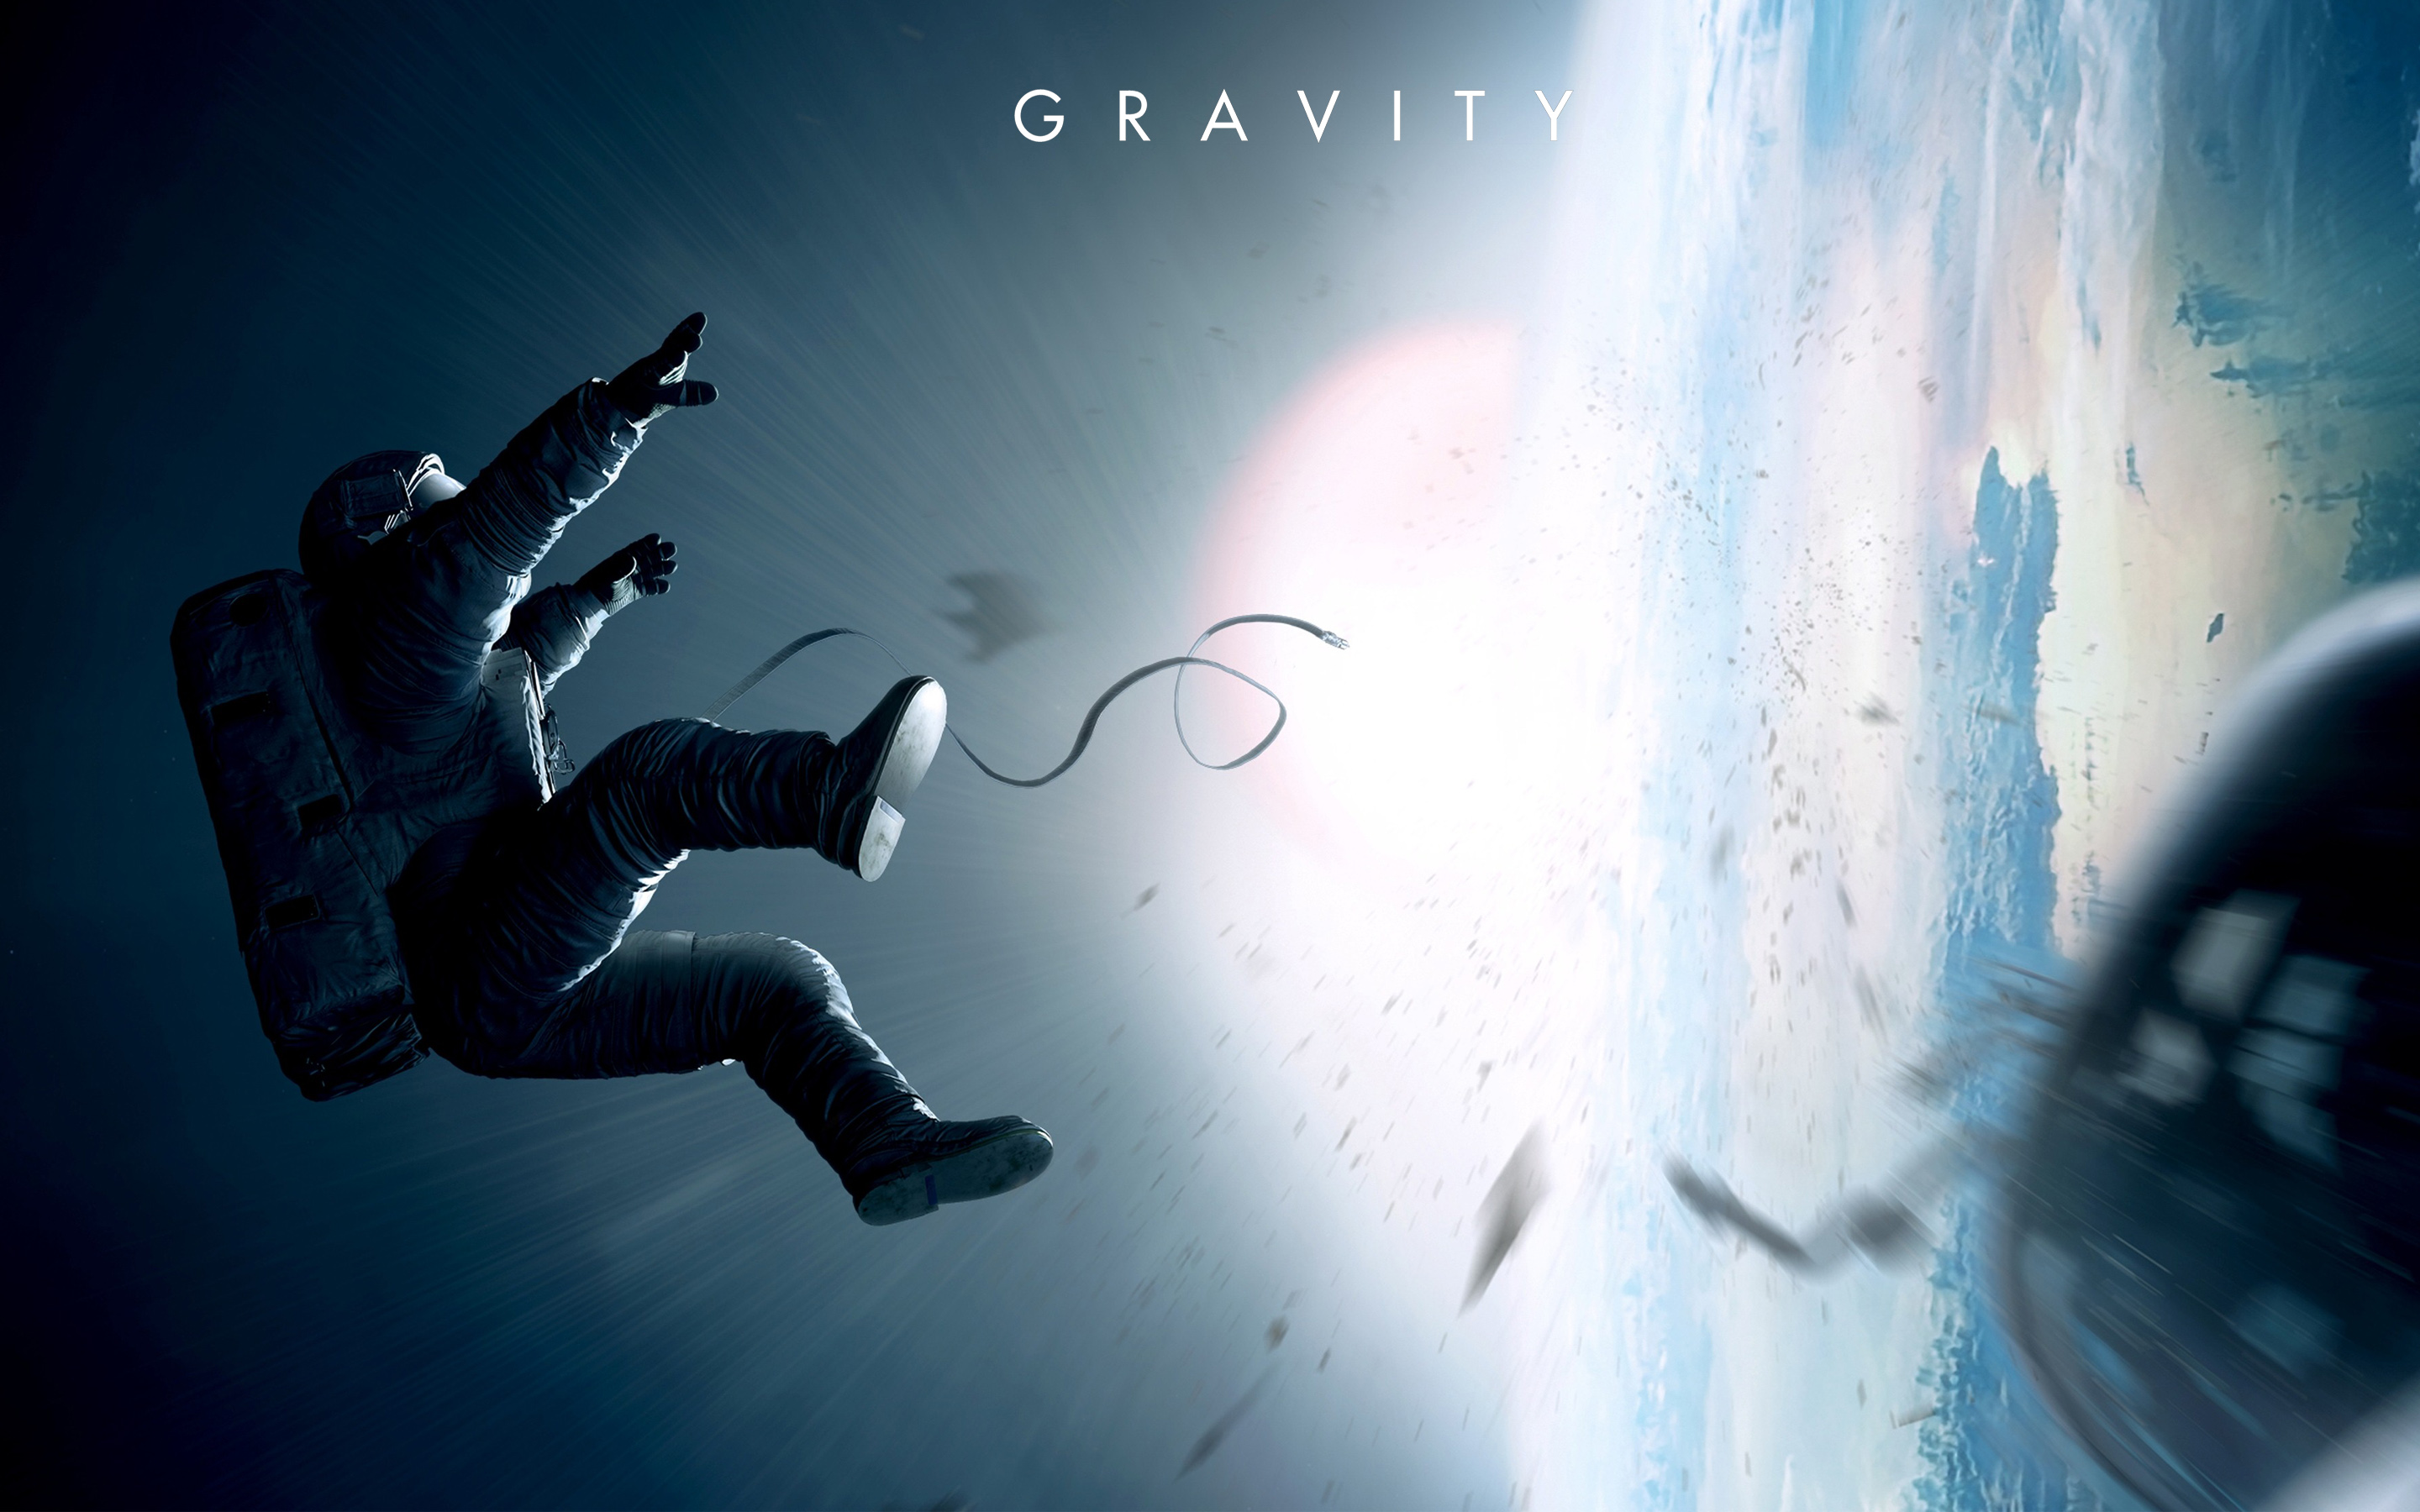 2013 Gravity Movie Wallpapers HD Wallpapers 2880x1800